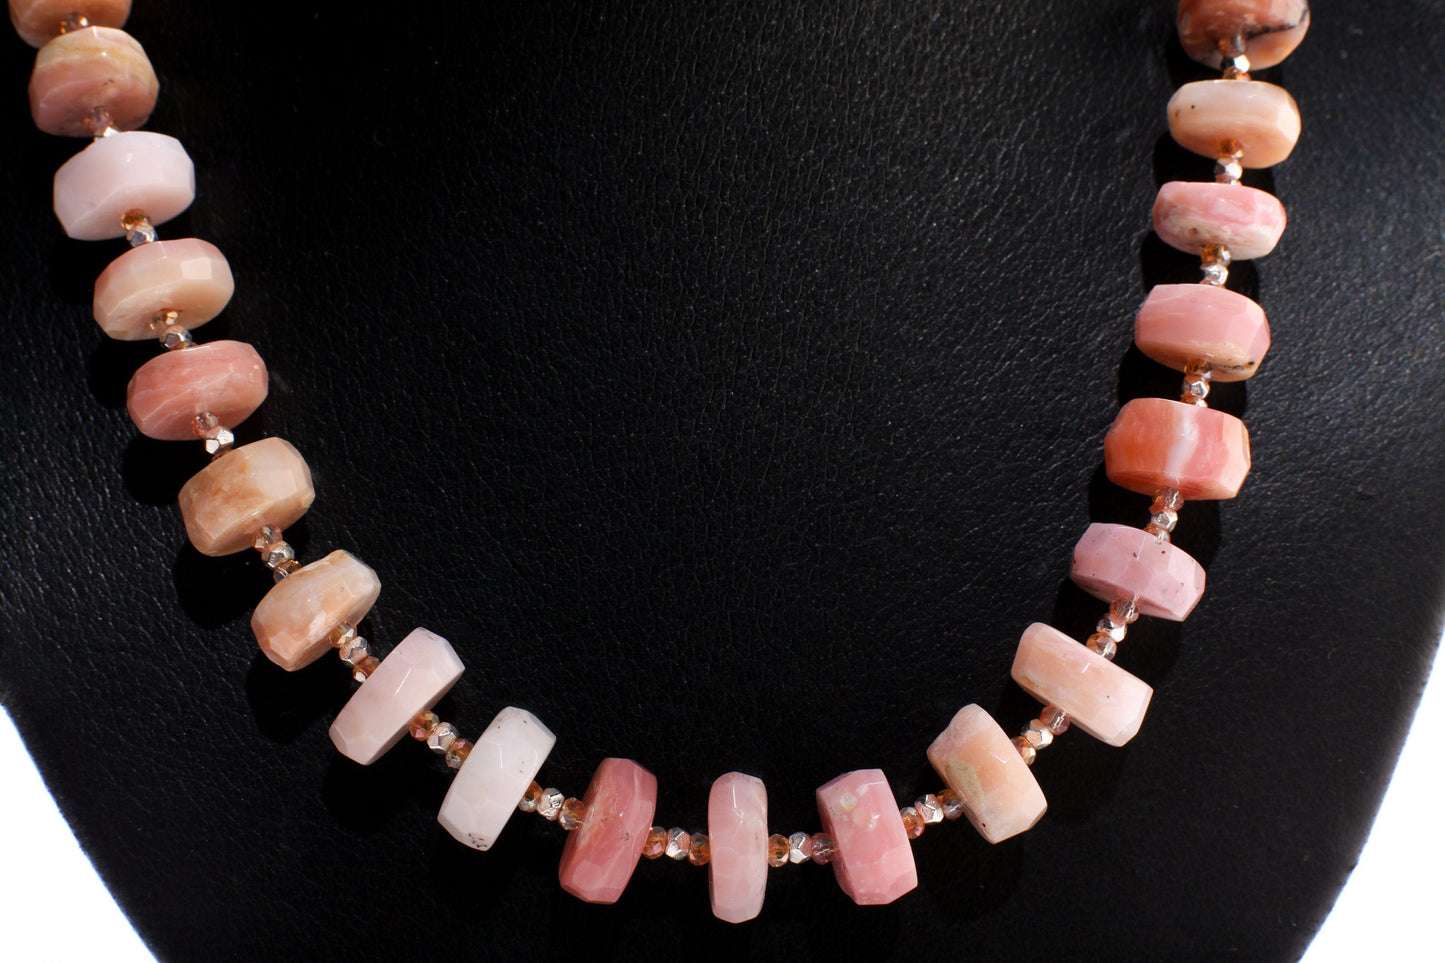 Pink Peruvian Opal Faceted Rondelle,12-14mm tyre shape Natural Gemstone in 925 Sterling Silver 19.5&quot; Necklace and 2&quot; Extension Chain